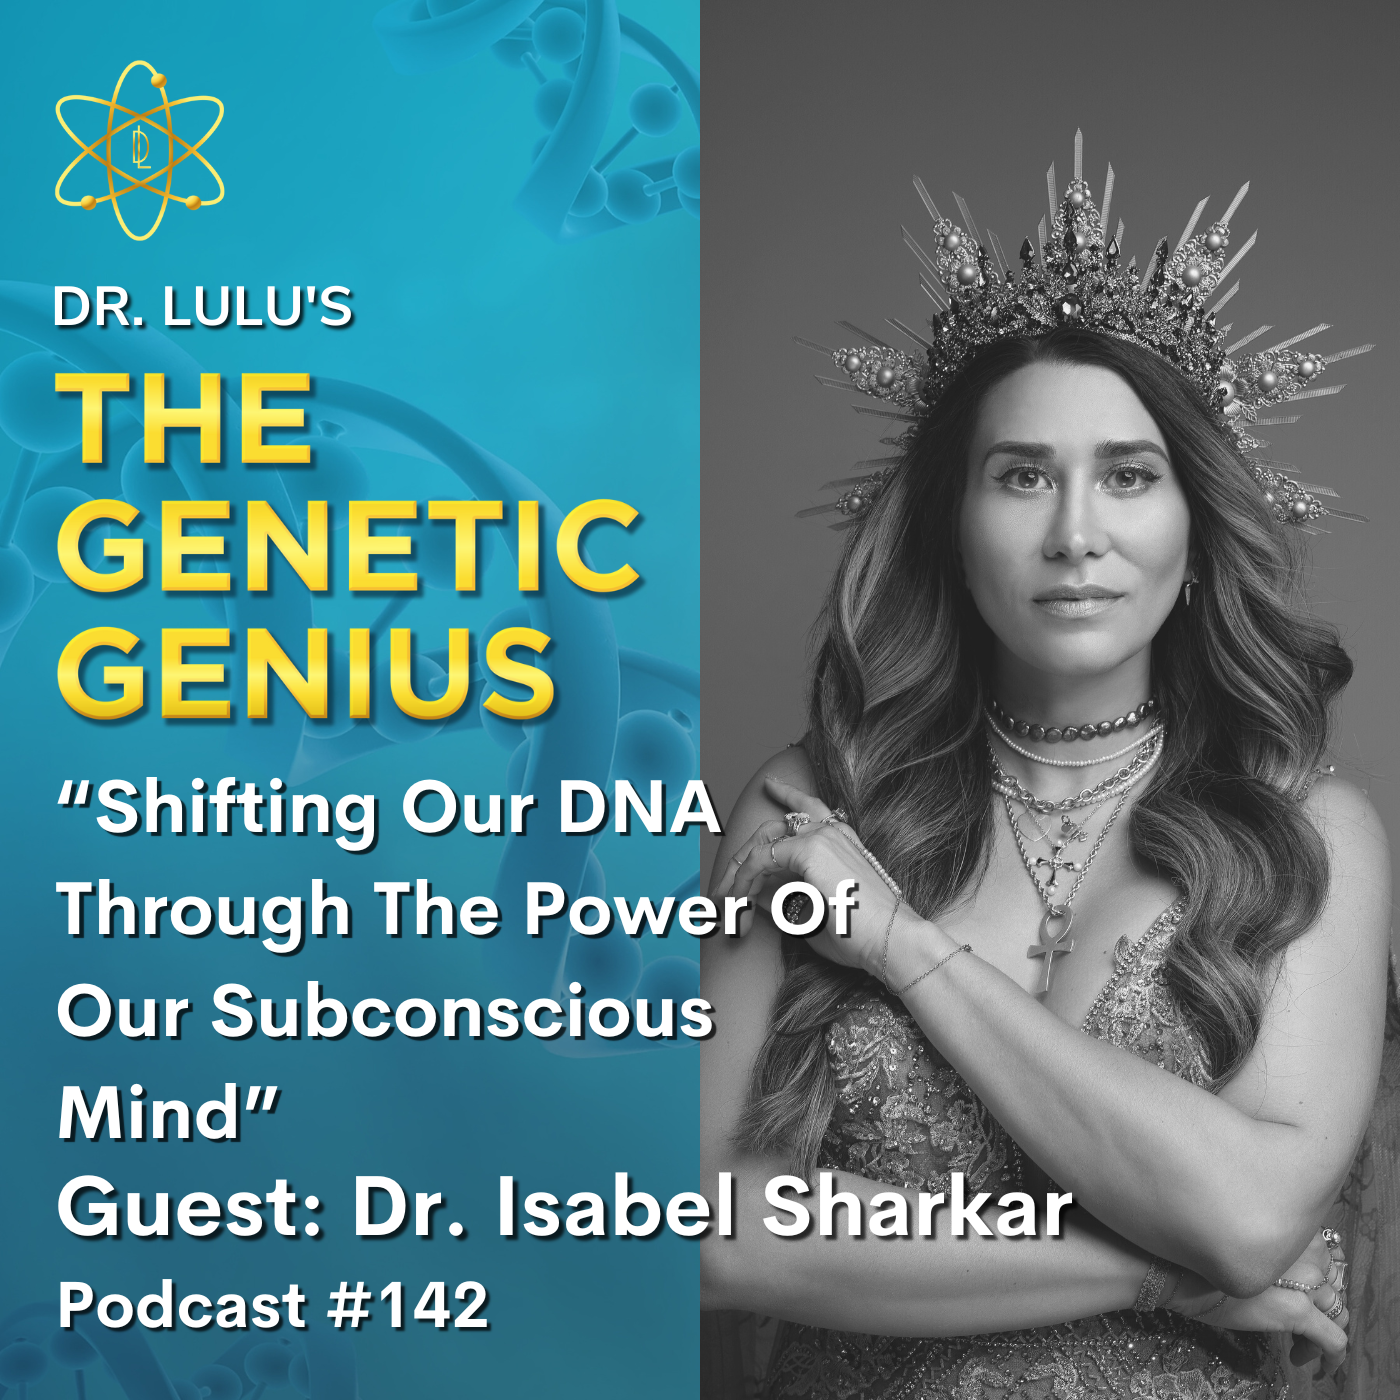 SHIFTING OUR DNA THROUGH THE POWER OF OUR SUBCONSCIOUS MIND